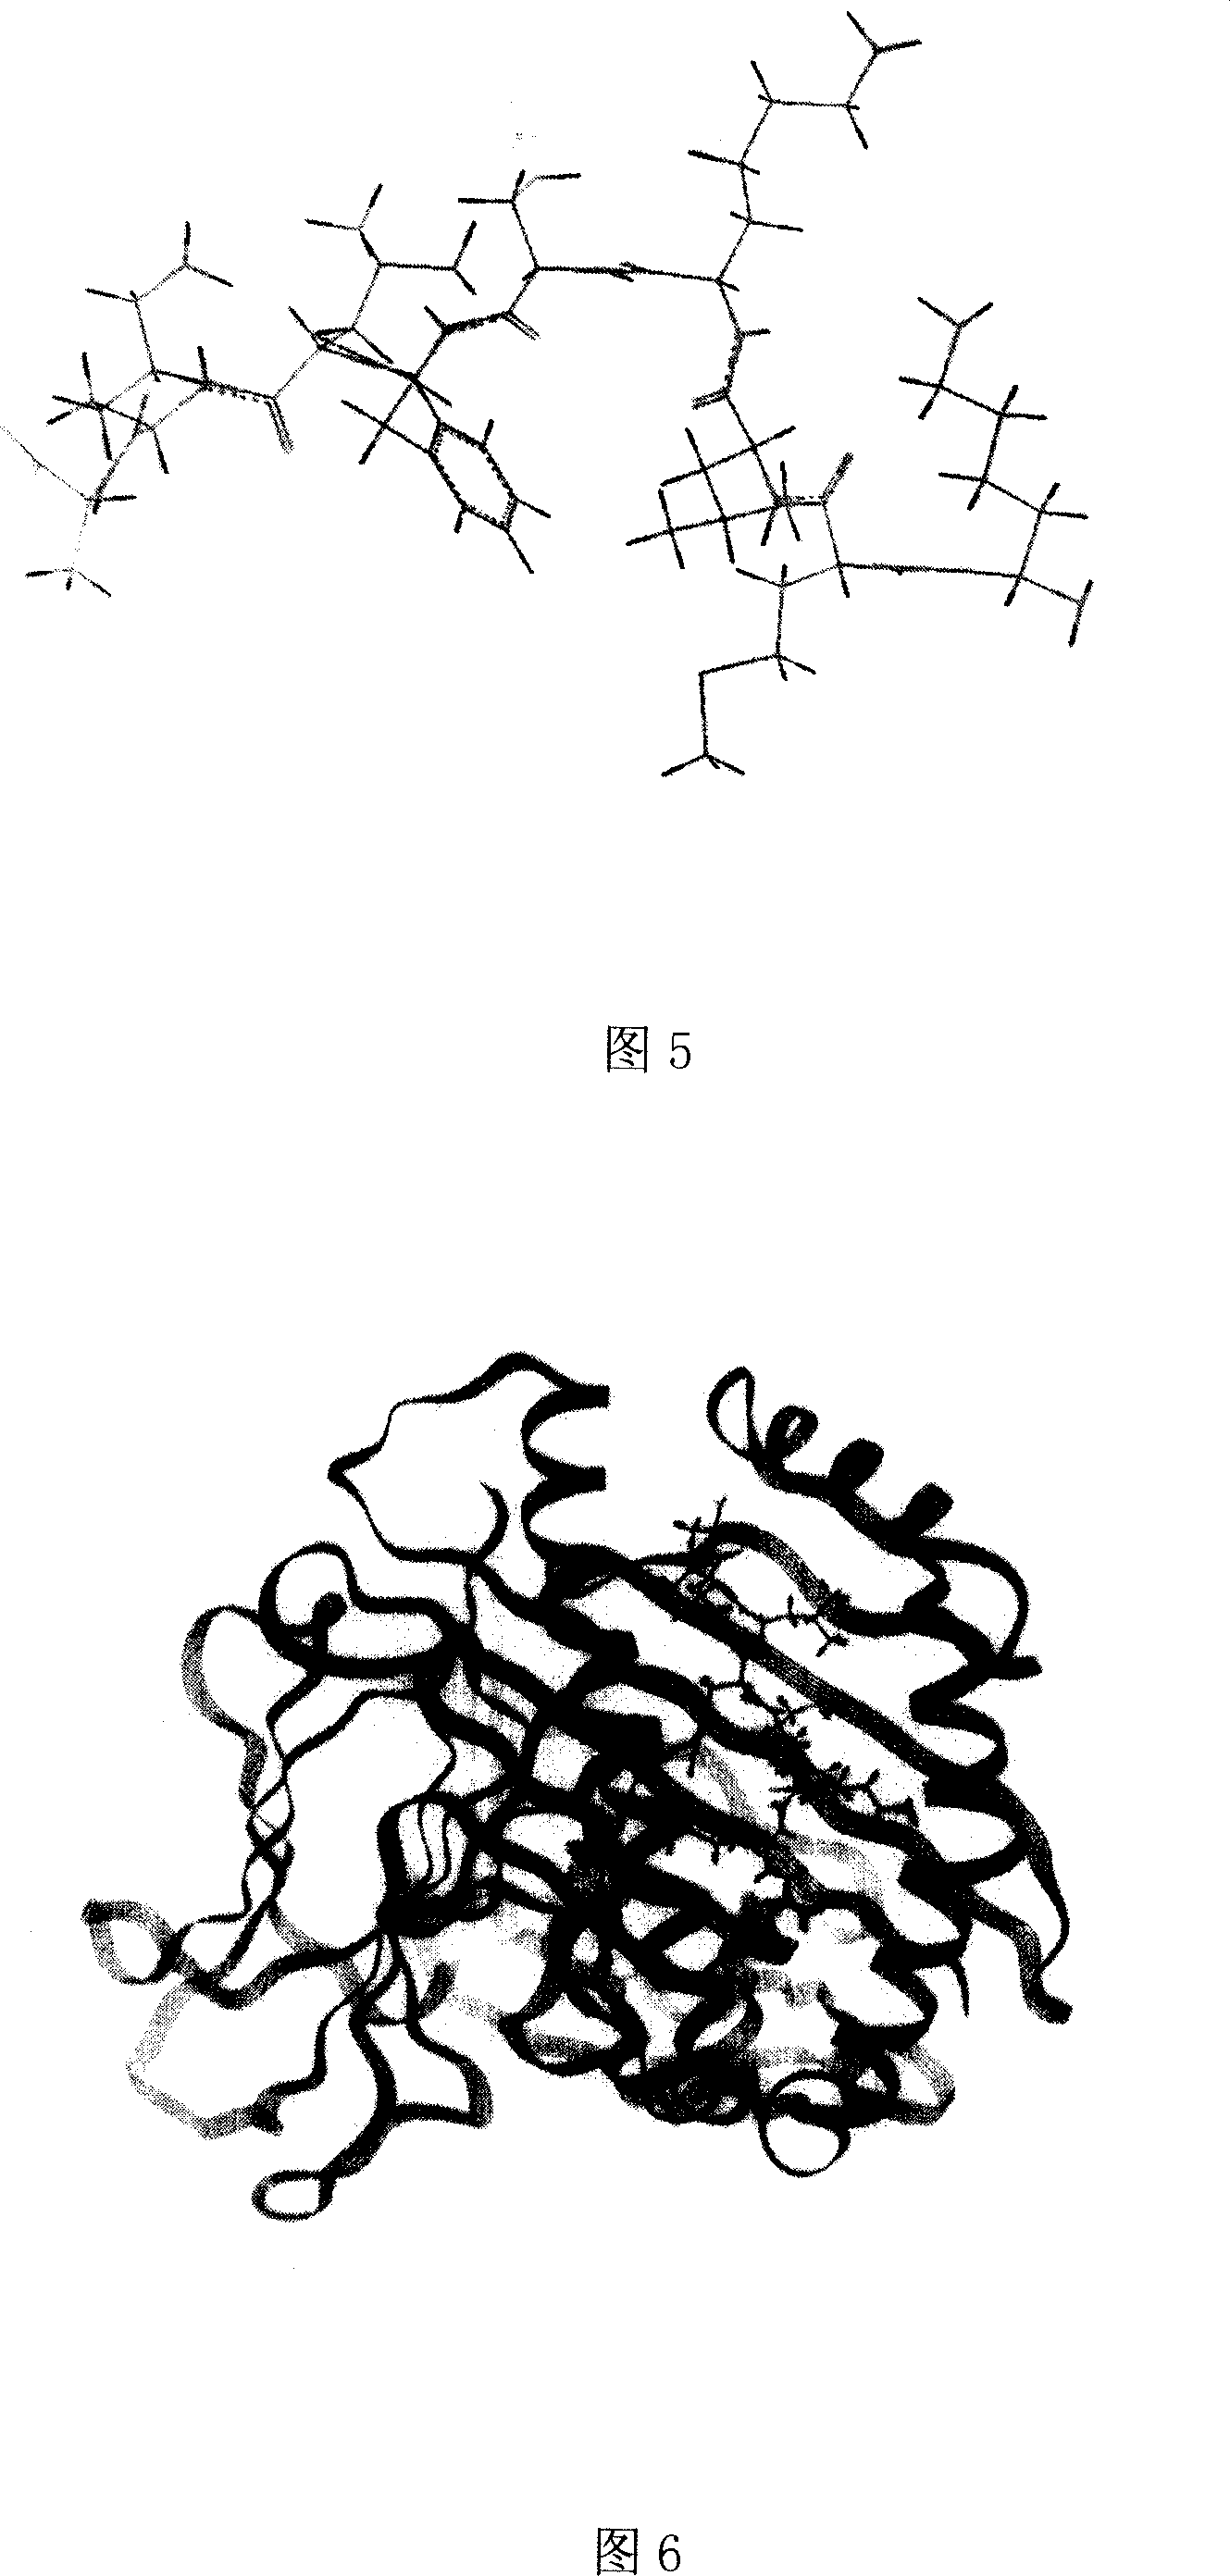 Heparinase polypeptide epitope combined to molecules in human MIIC -I category